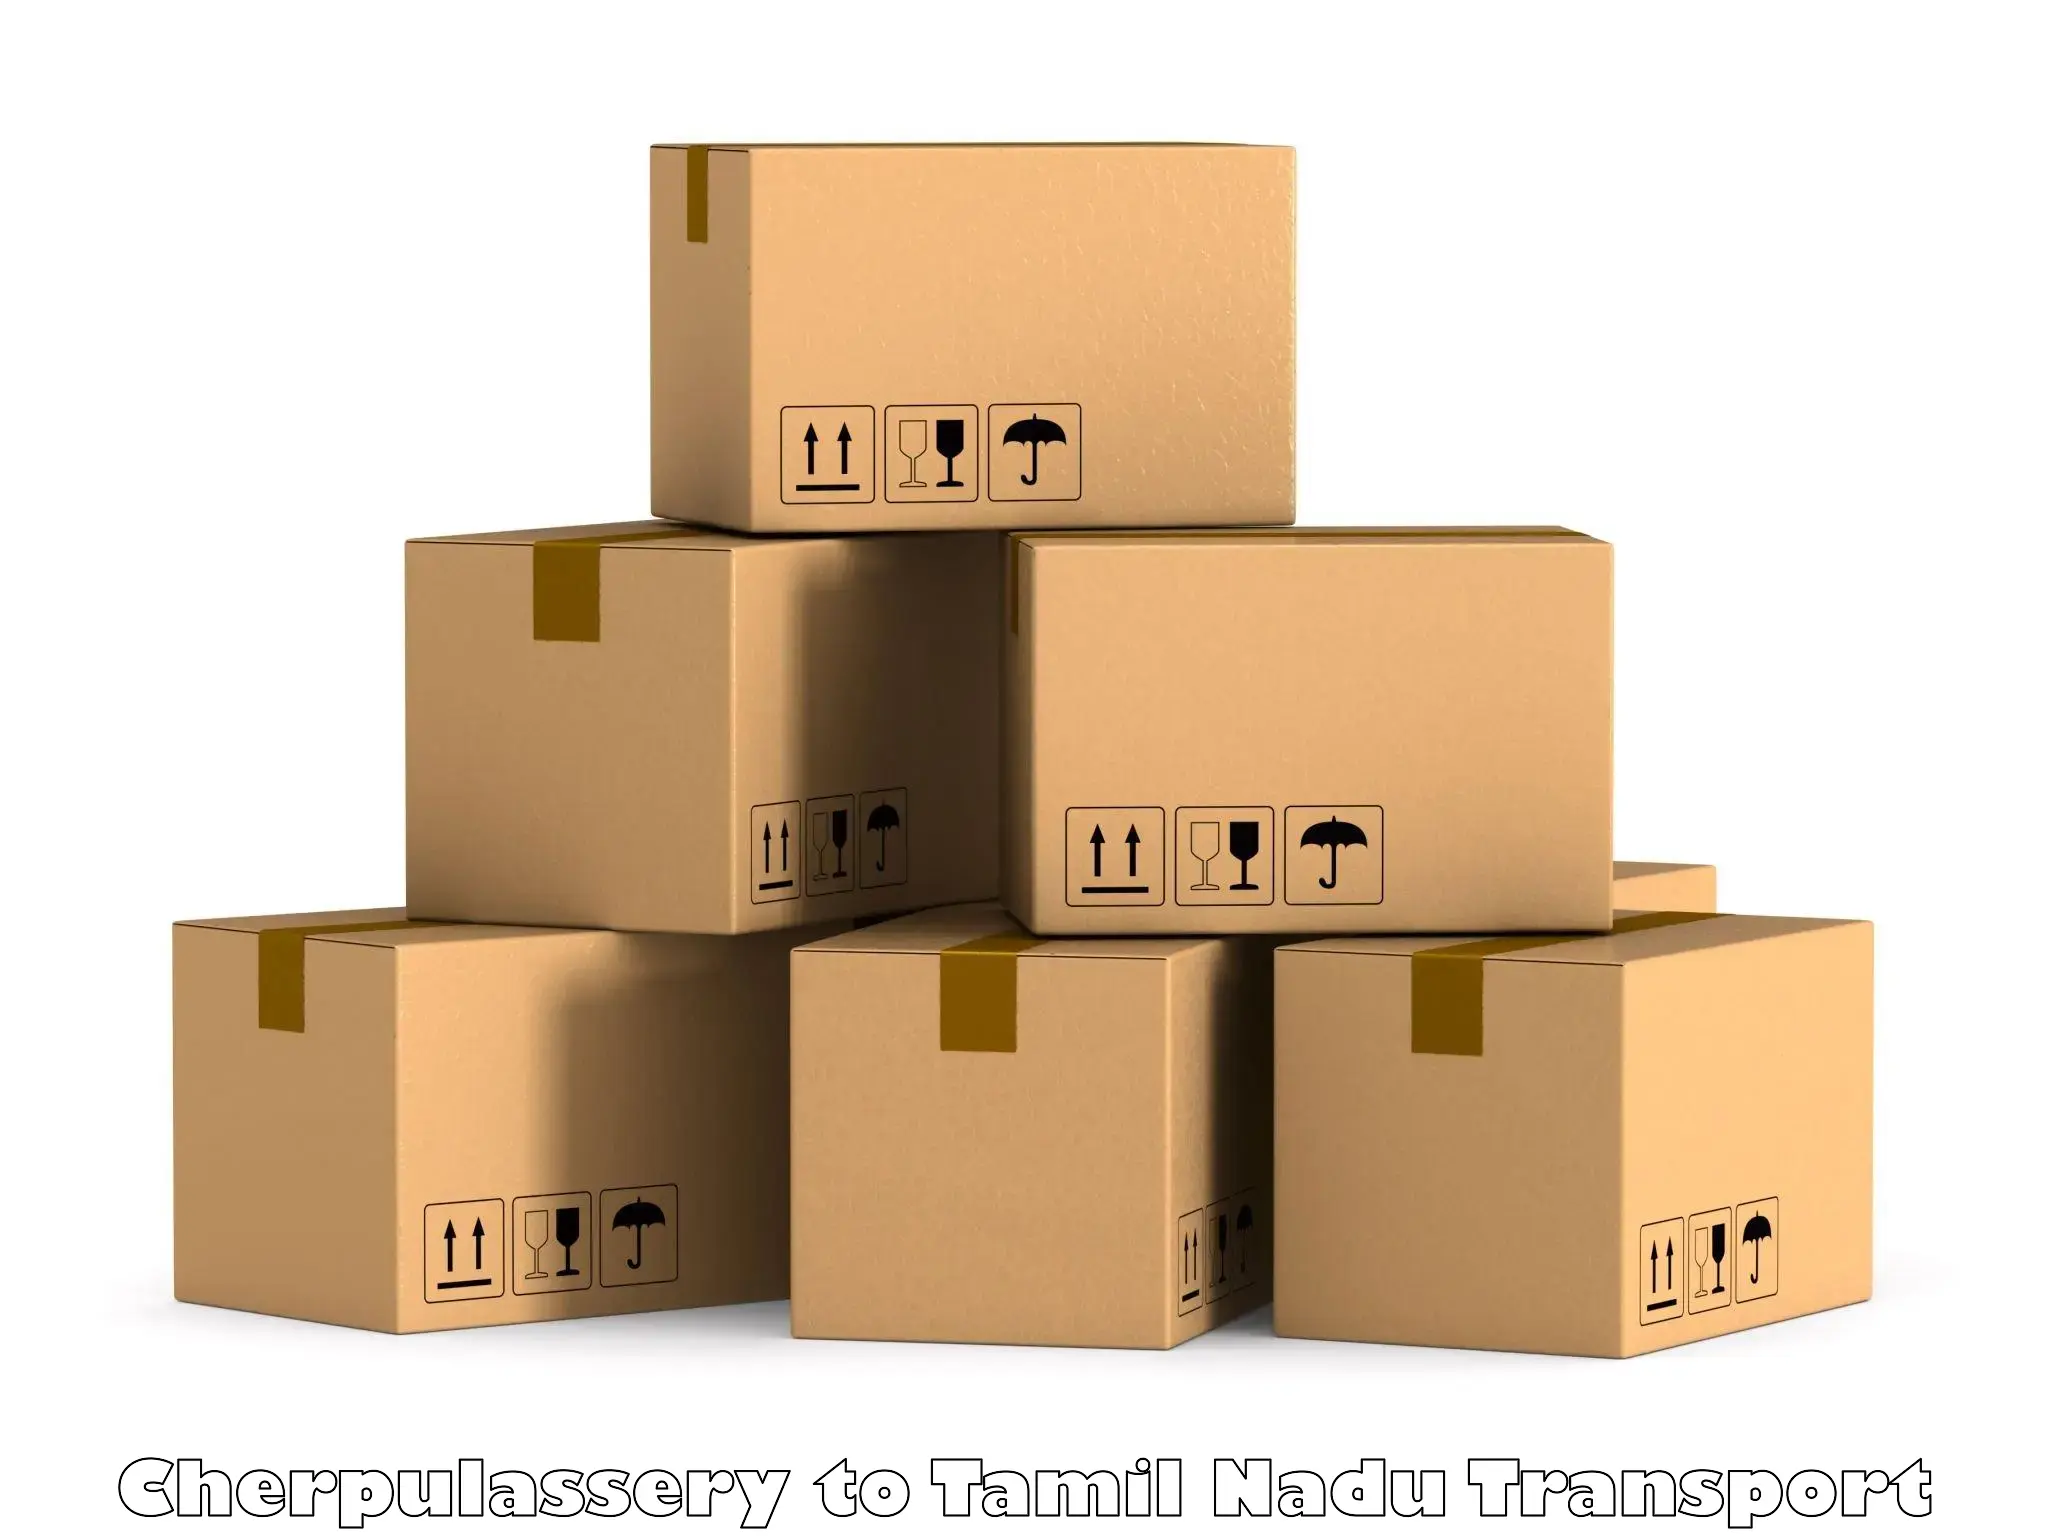 Package delivery services Cherpulassery to Tamil Nadu